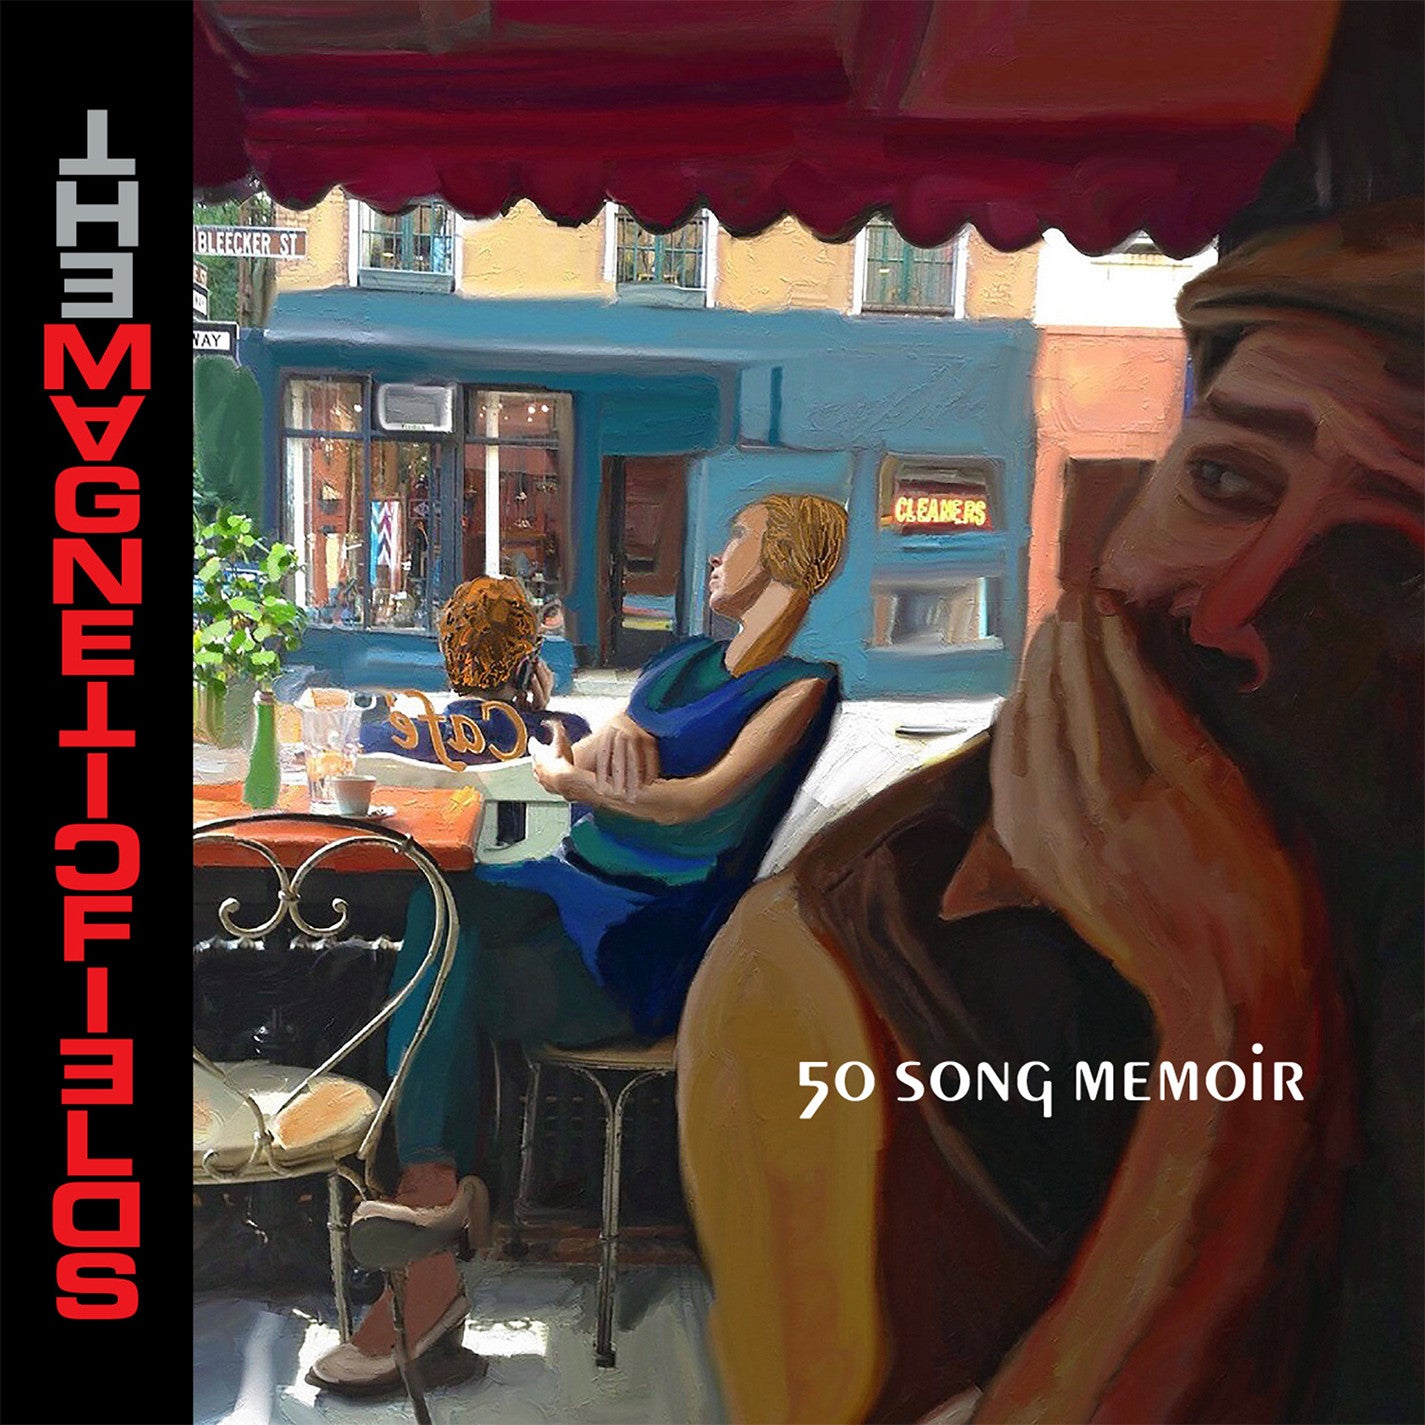 The Magnetic Fields - 50 Song Memoir - New Vinyl Record 2017 Nonesuch Records 5-LP Boxset - Indie Pop / Synthpop